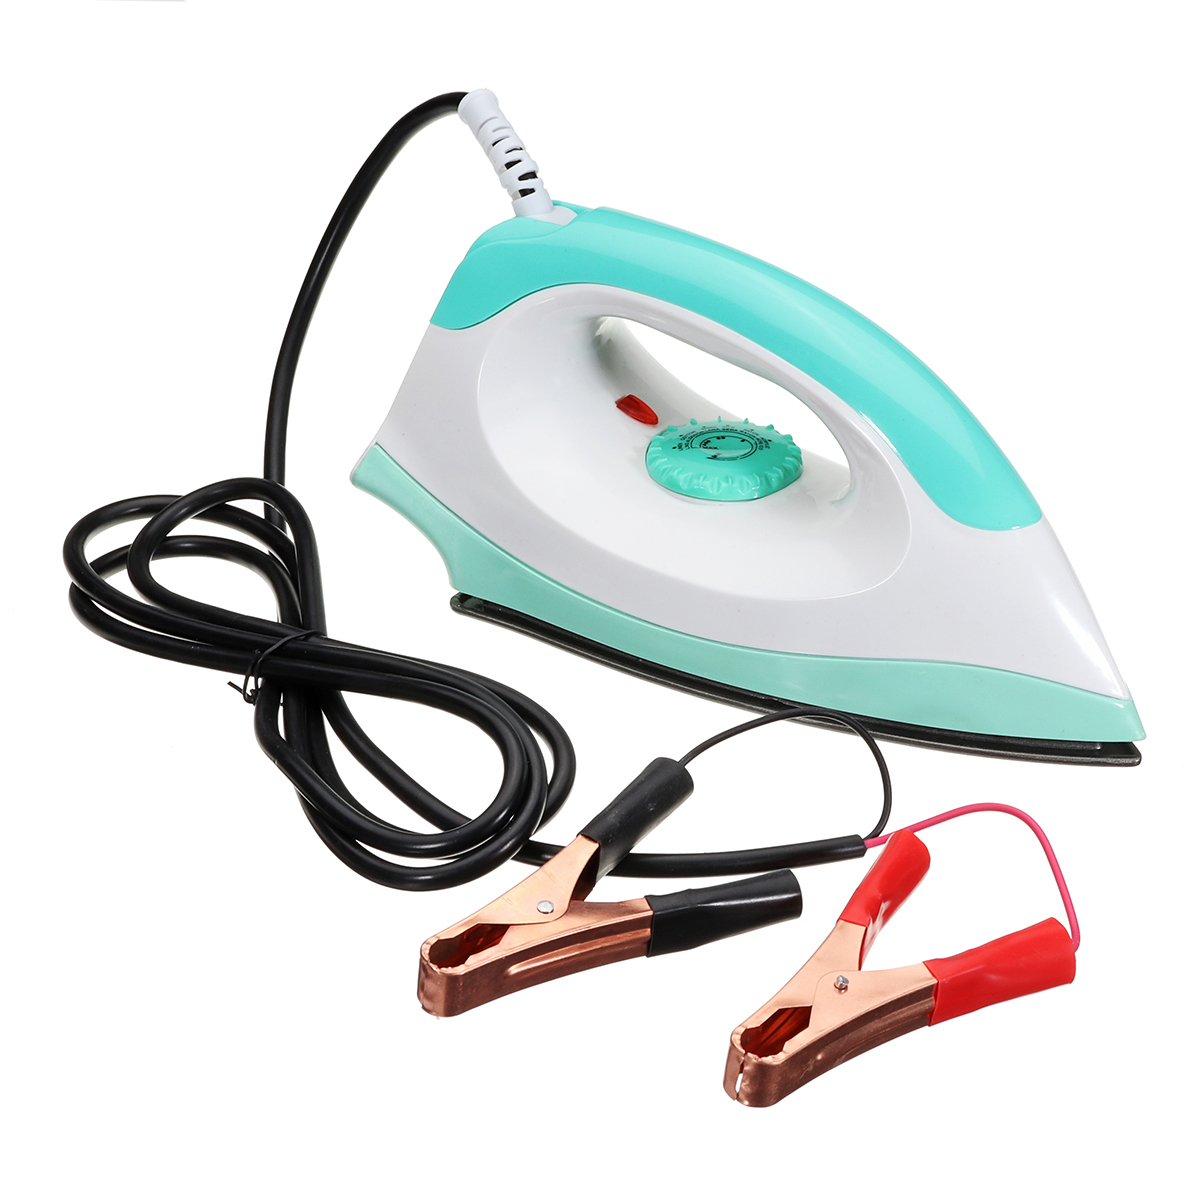 150W-DC12V-Mini-Electric-Iron-Portable-Clothes-Dry-Handheld-Steamer-Steam-Irons-Travel-Equipment-1347808-10